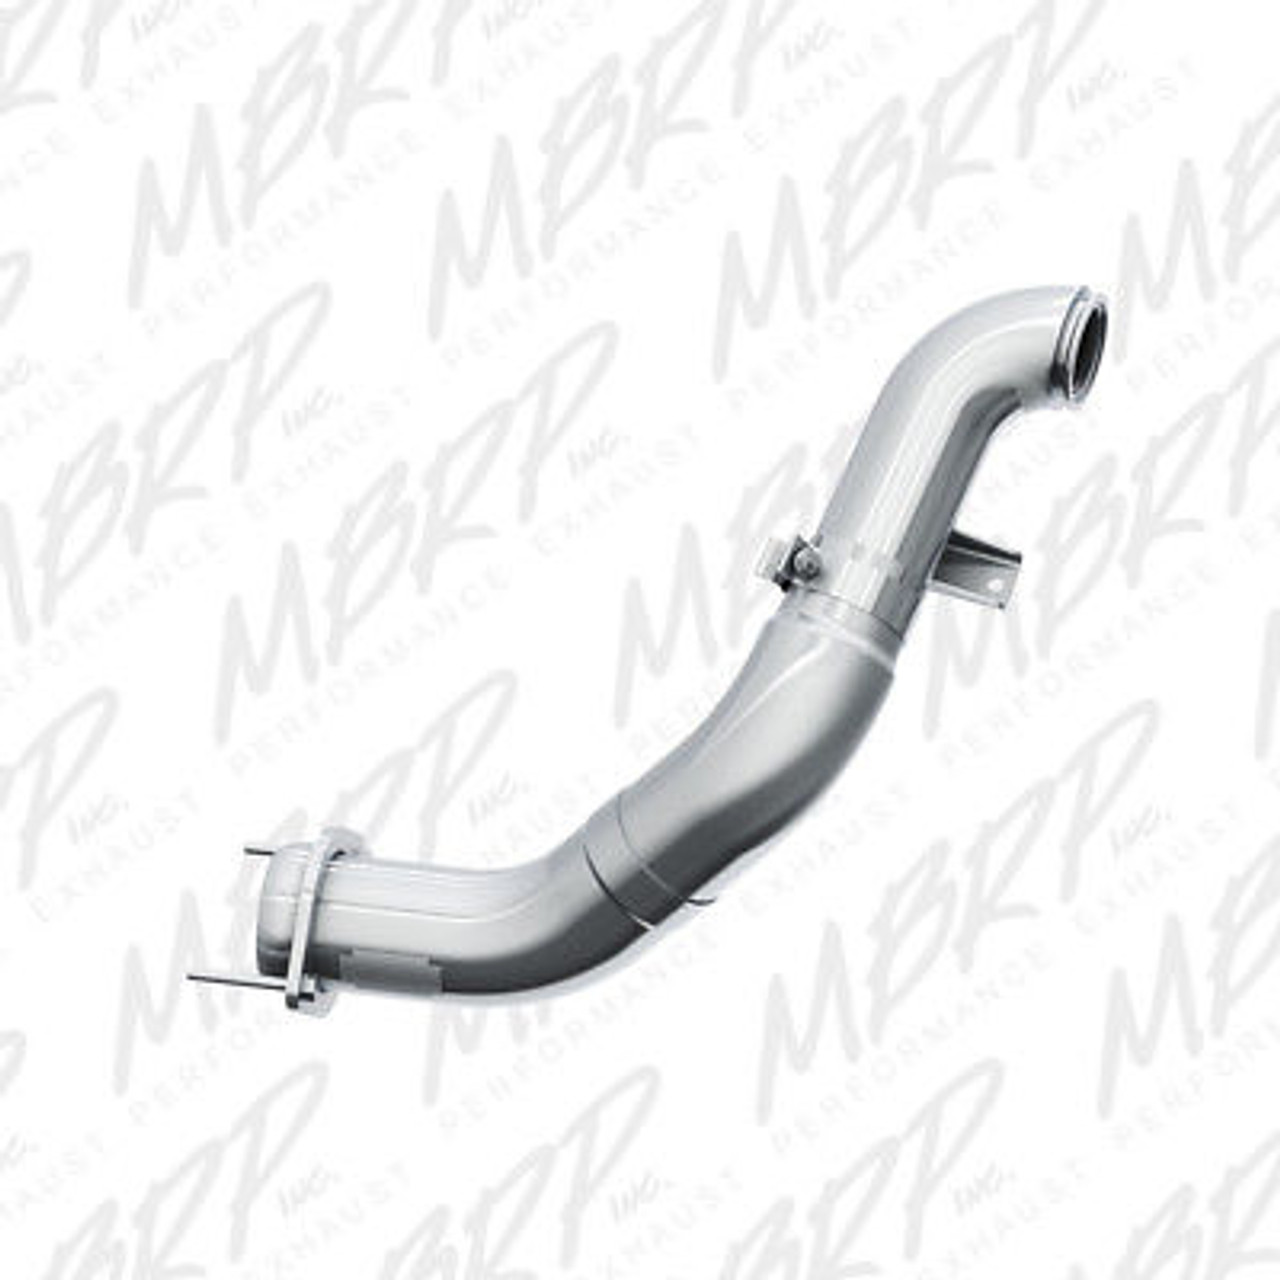 MBRP 4" TURBO DOWN PIPE EXHAUST 11-14 FORD POWERSTROKE DIESEL 6.7L ALUMINIZED